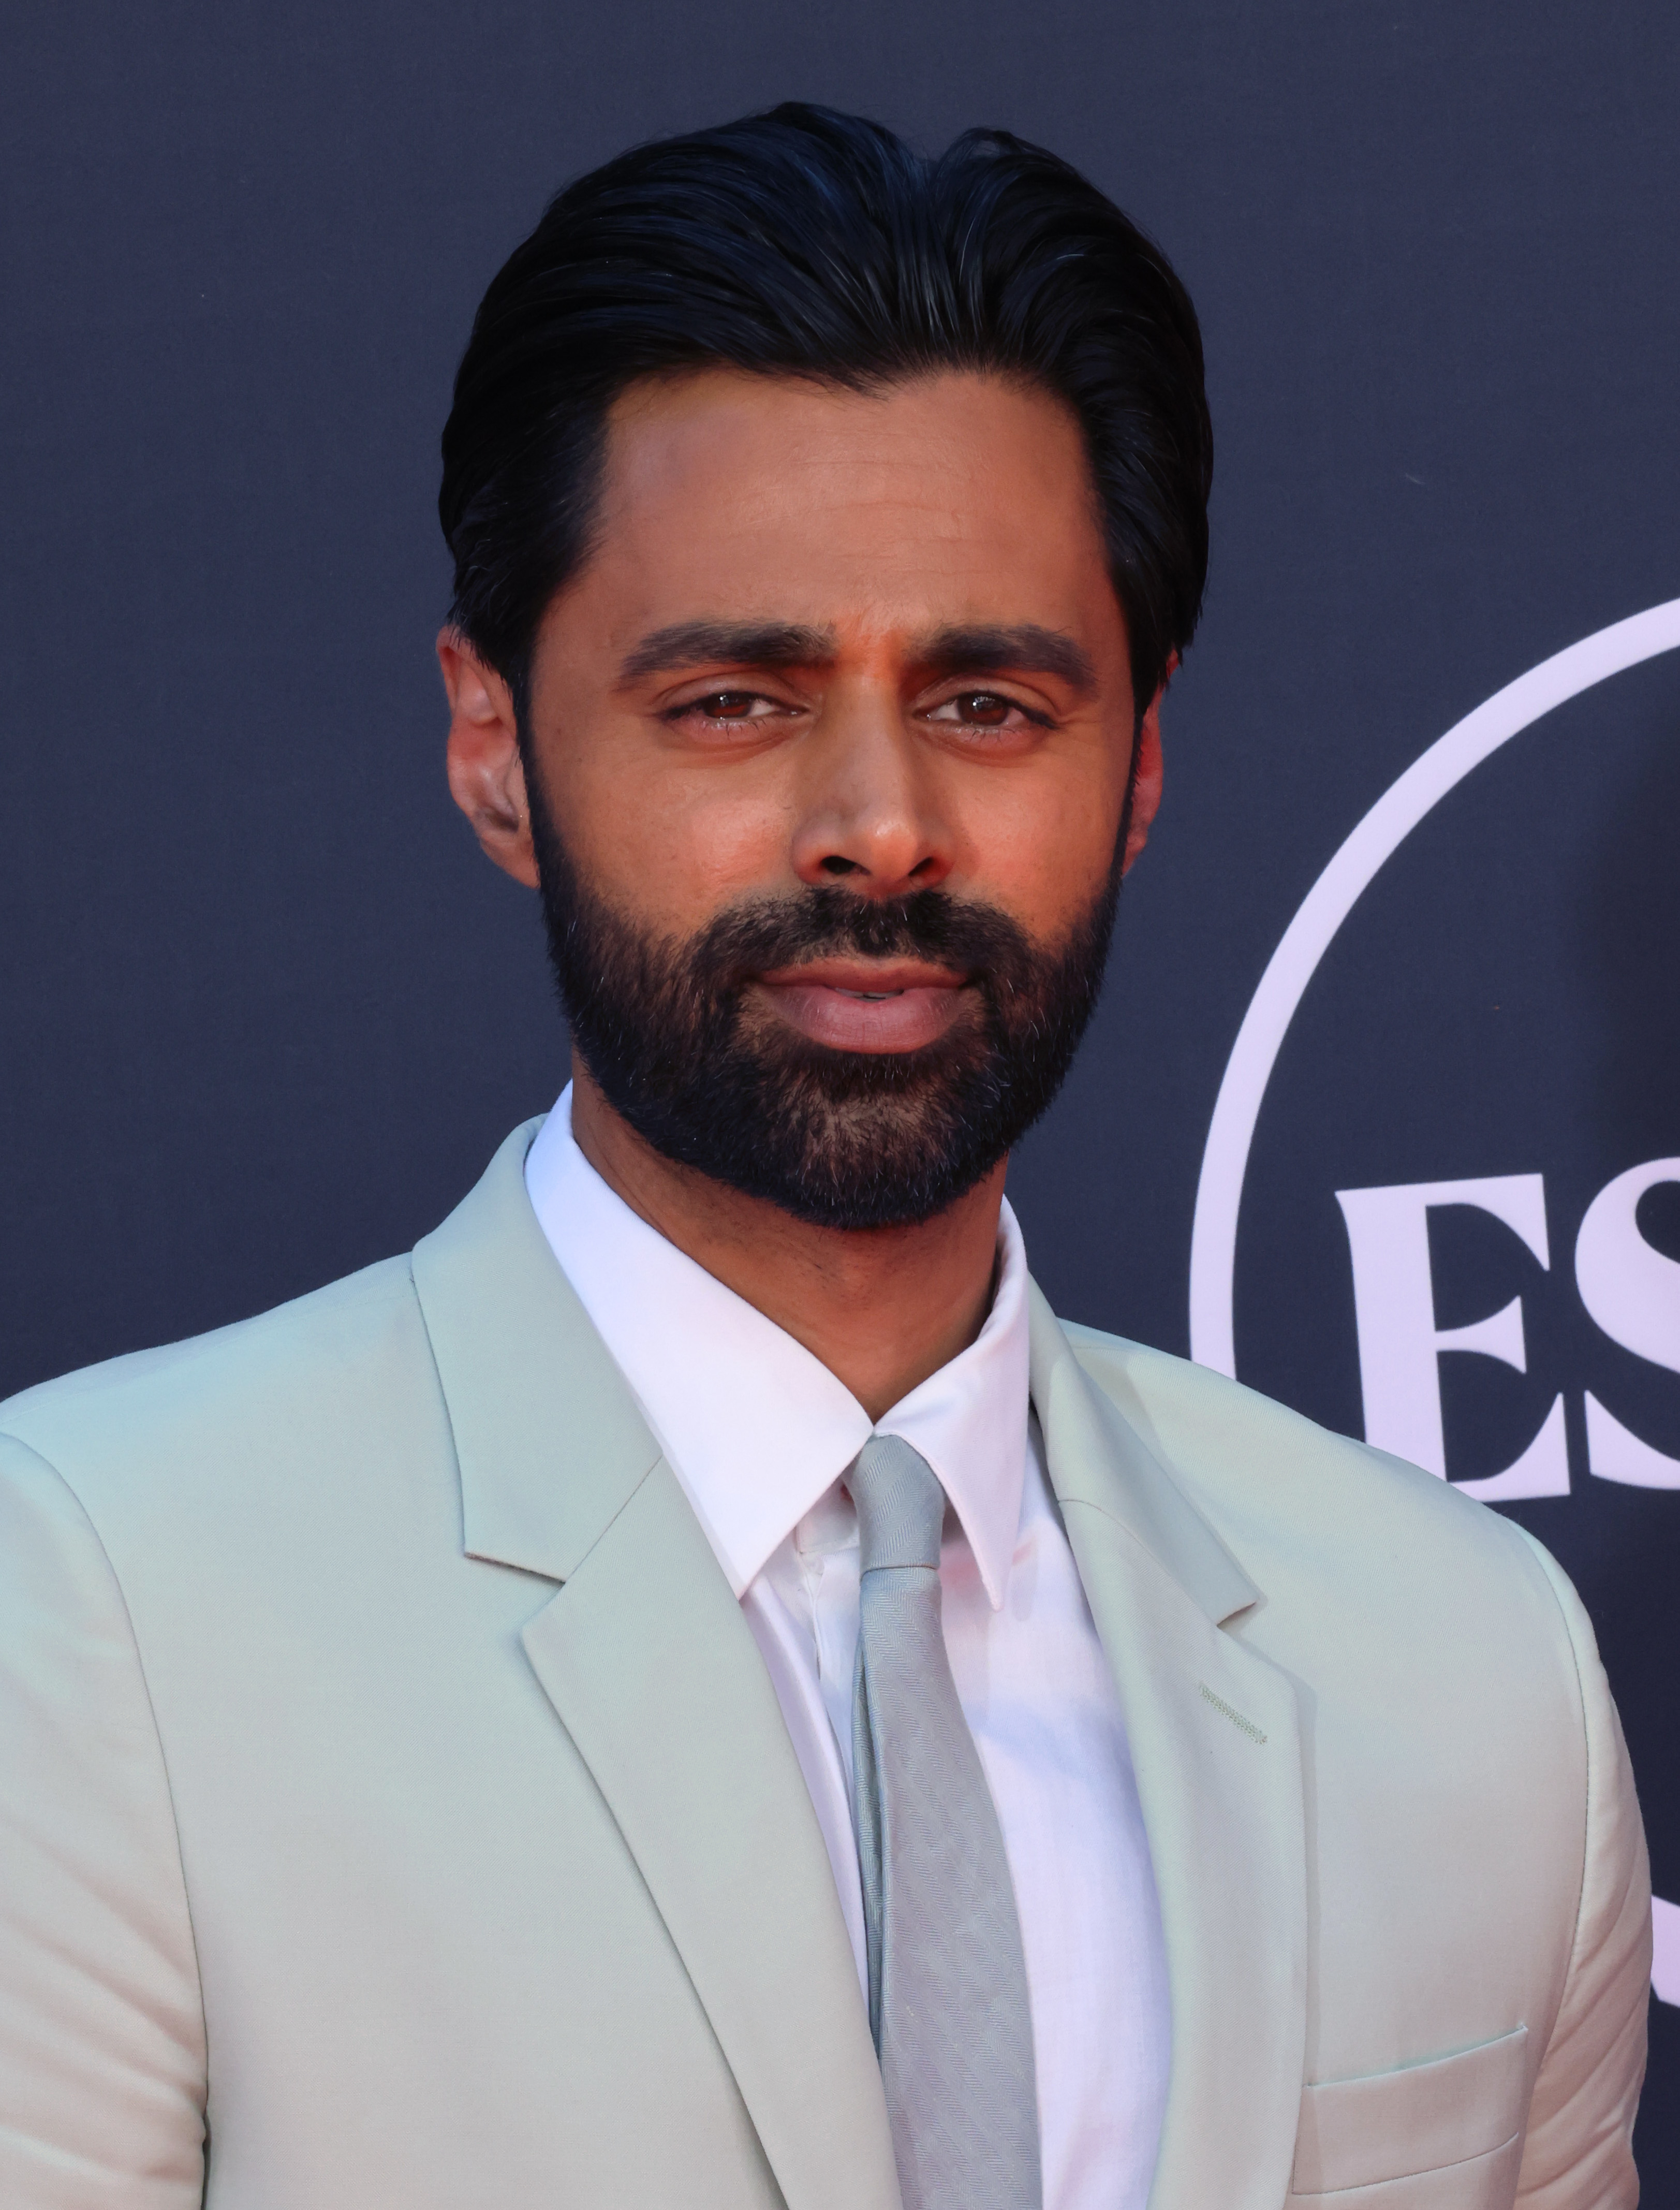 A closeup of Hasan in a suit and tie at an event